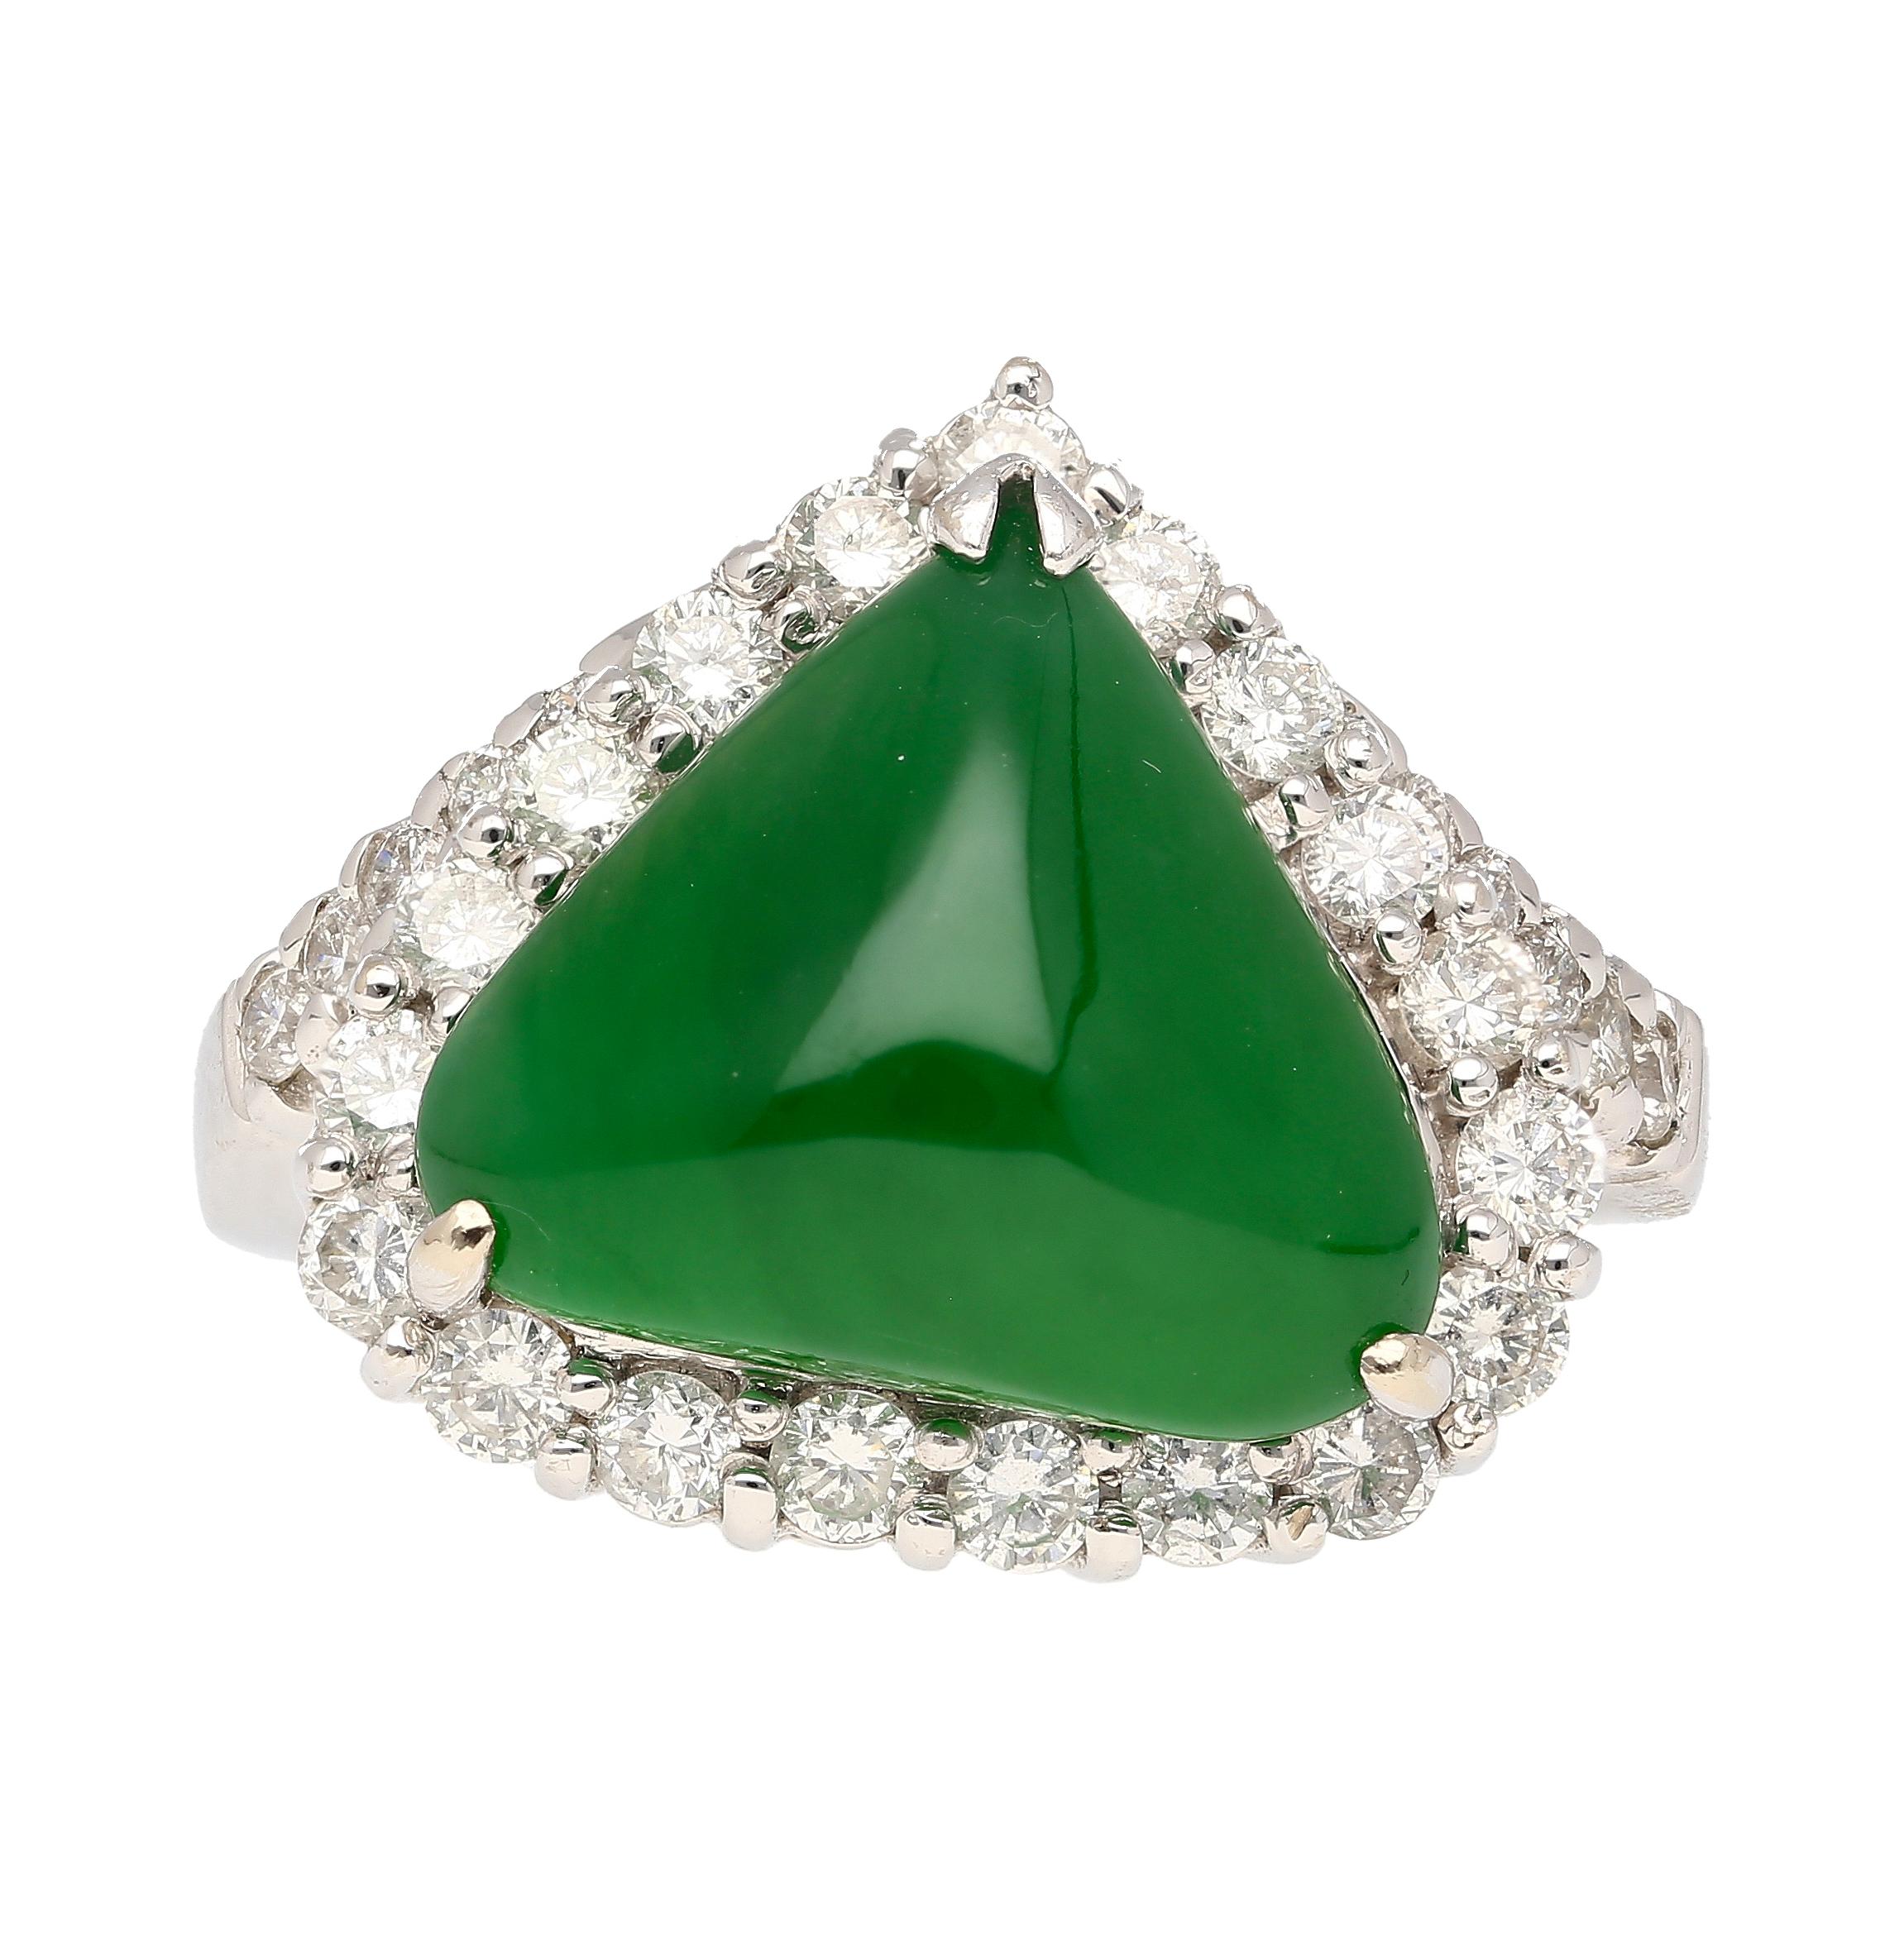 Cabochon Cut Kite/Triangle Shaped Type A Jadeite Jade in a 3-prong 18k white gold ring setting.

Featuring a prong-set Jade centerpiece embraced by a dazzling halo of diamond side-stones, this captivating masterpiece exudes timeless elegance and